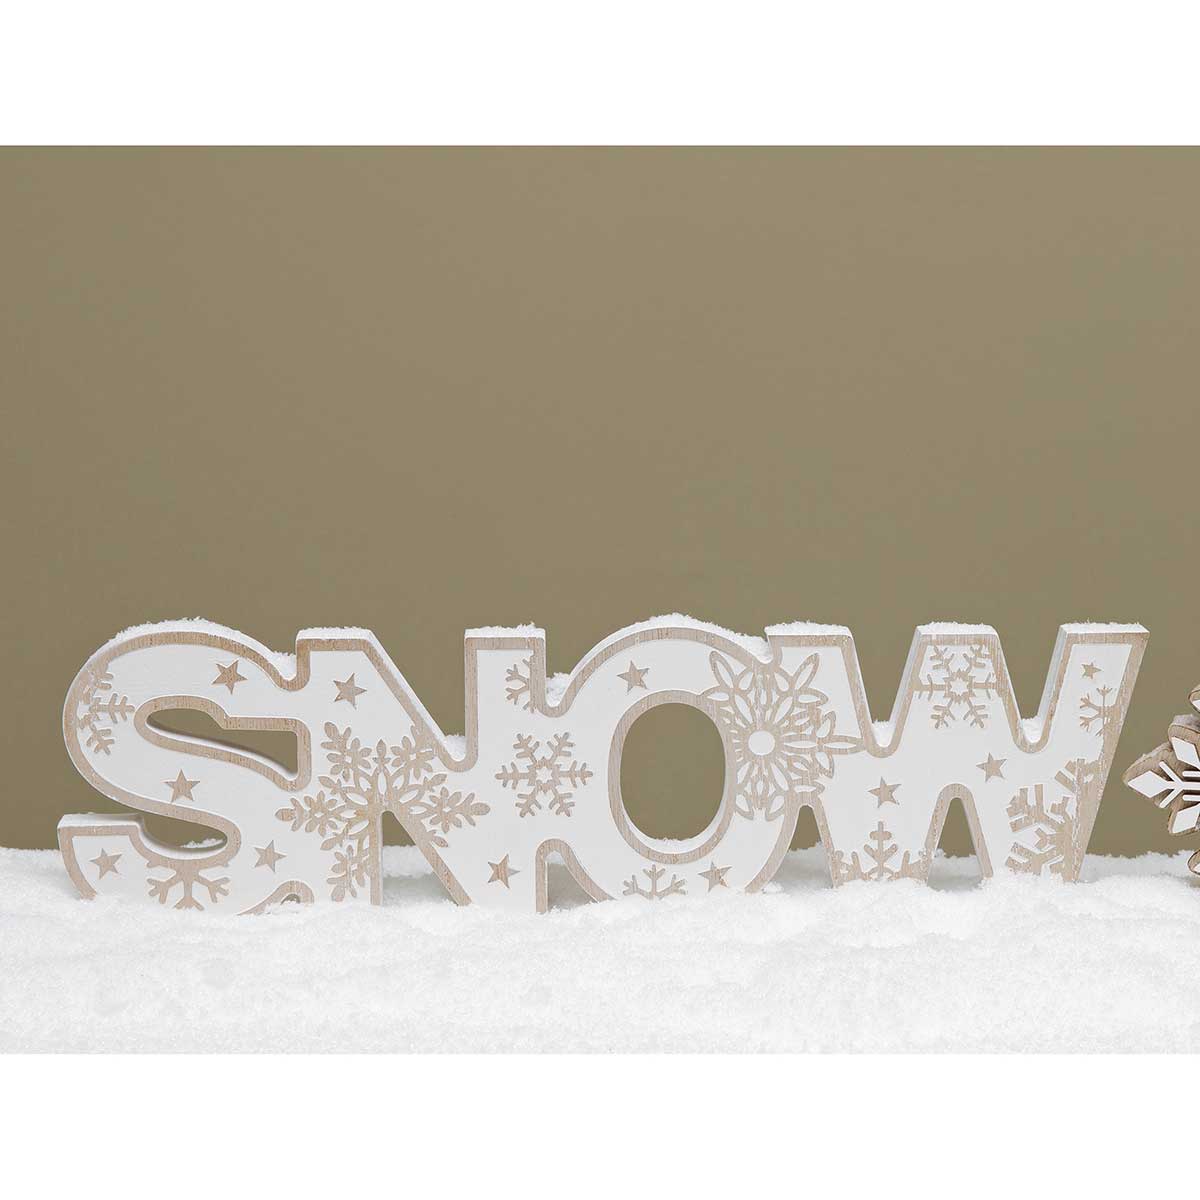 SNOW SIGN WOOD SIT-A-BOUT NATURAL/WHITE 15.5"X.75"X4.5"